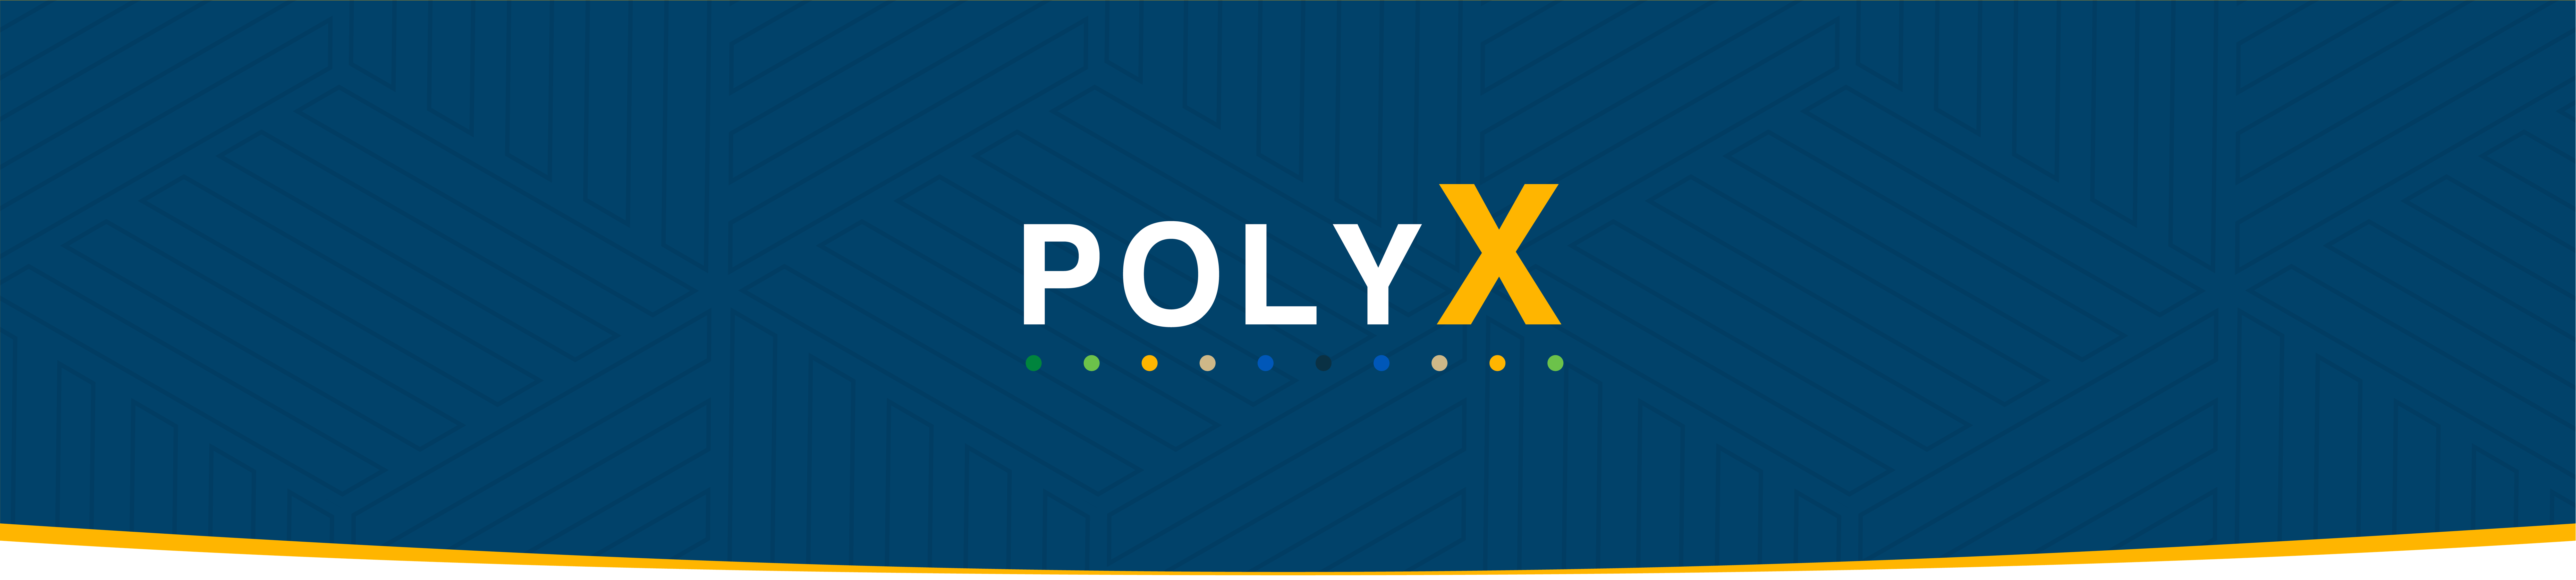 PolyX Inventory on blue-to-tan gradient background